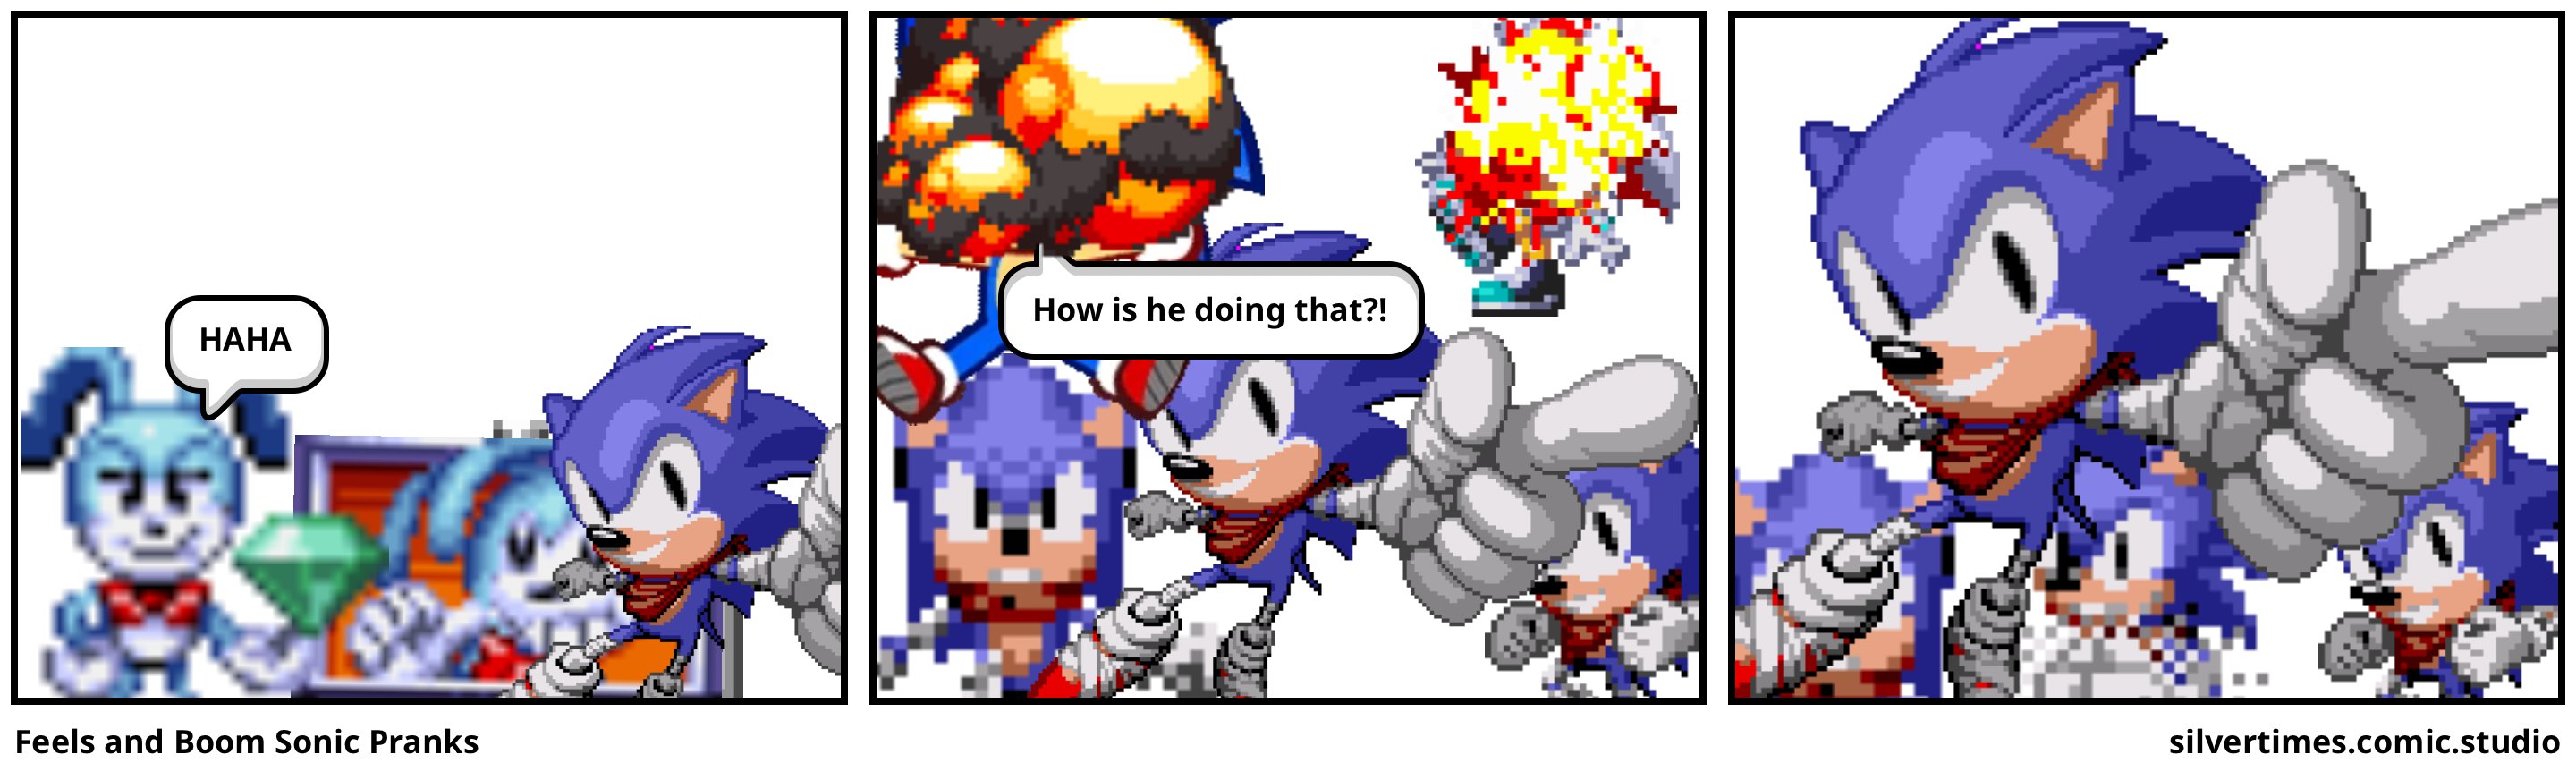 Feels and Boom Sonic Pranks